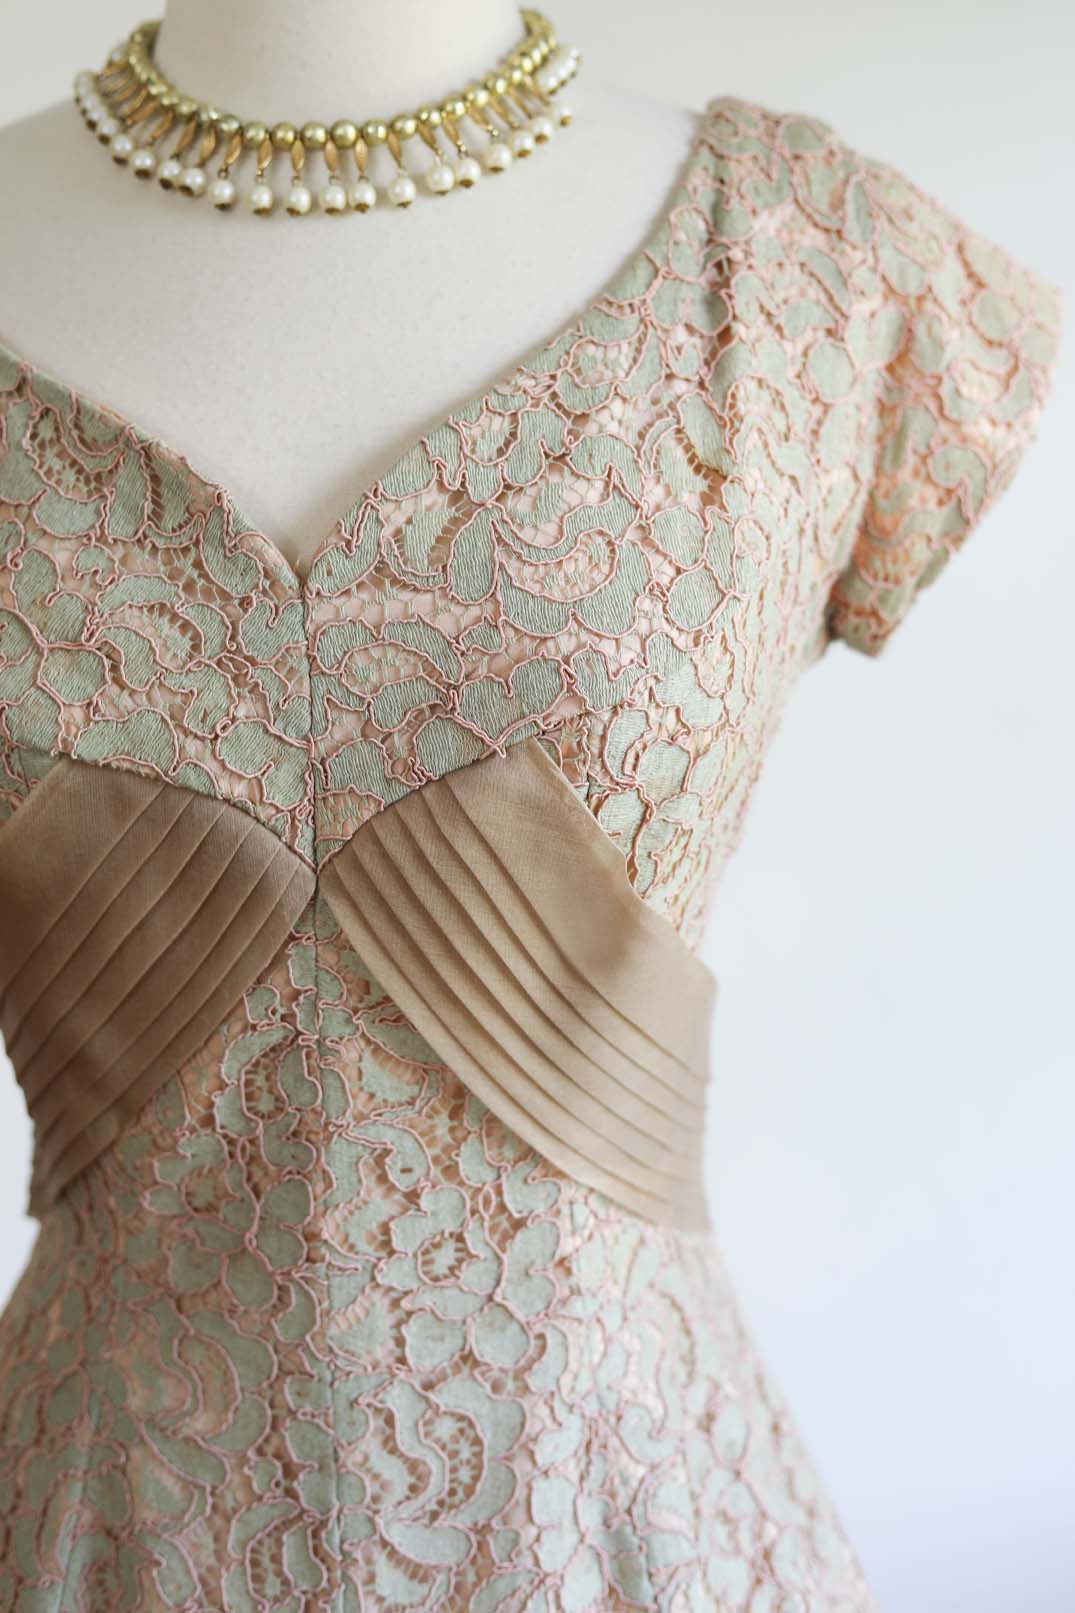 Vintage 1950s Dress - DIVINE Latte Lace over Blush Pink Cocktail Party Dress w Sweeping Bow Size M